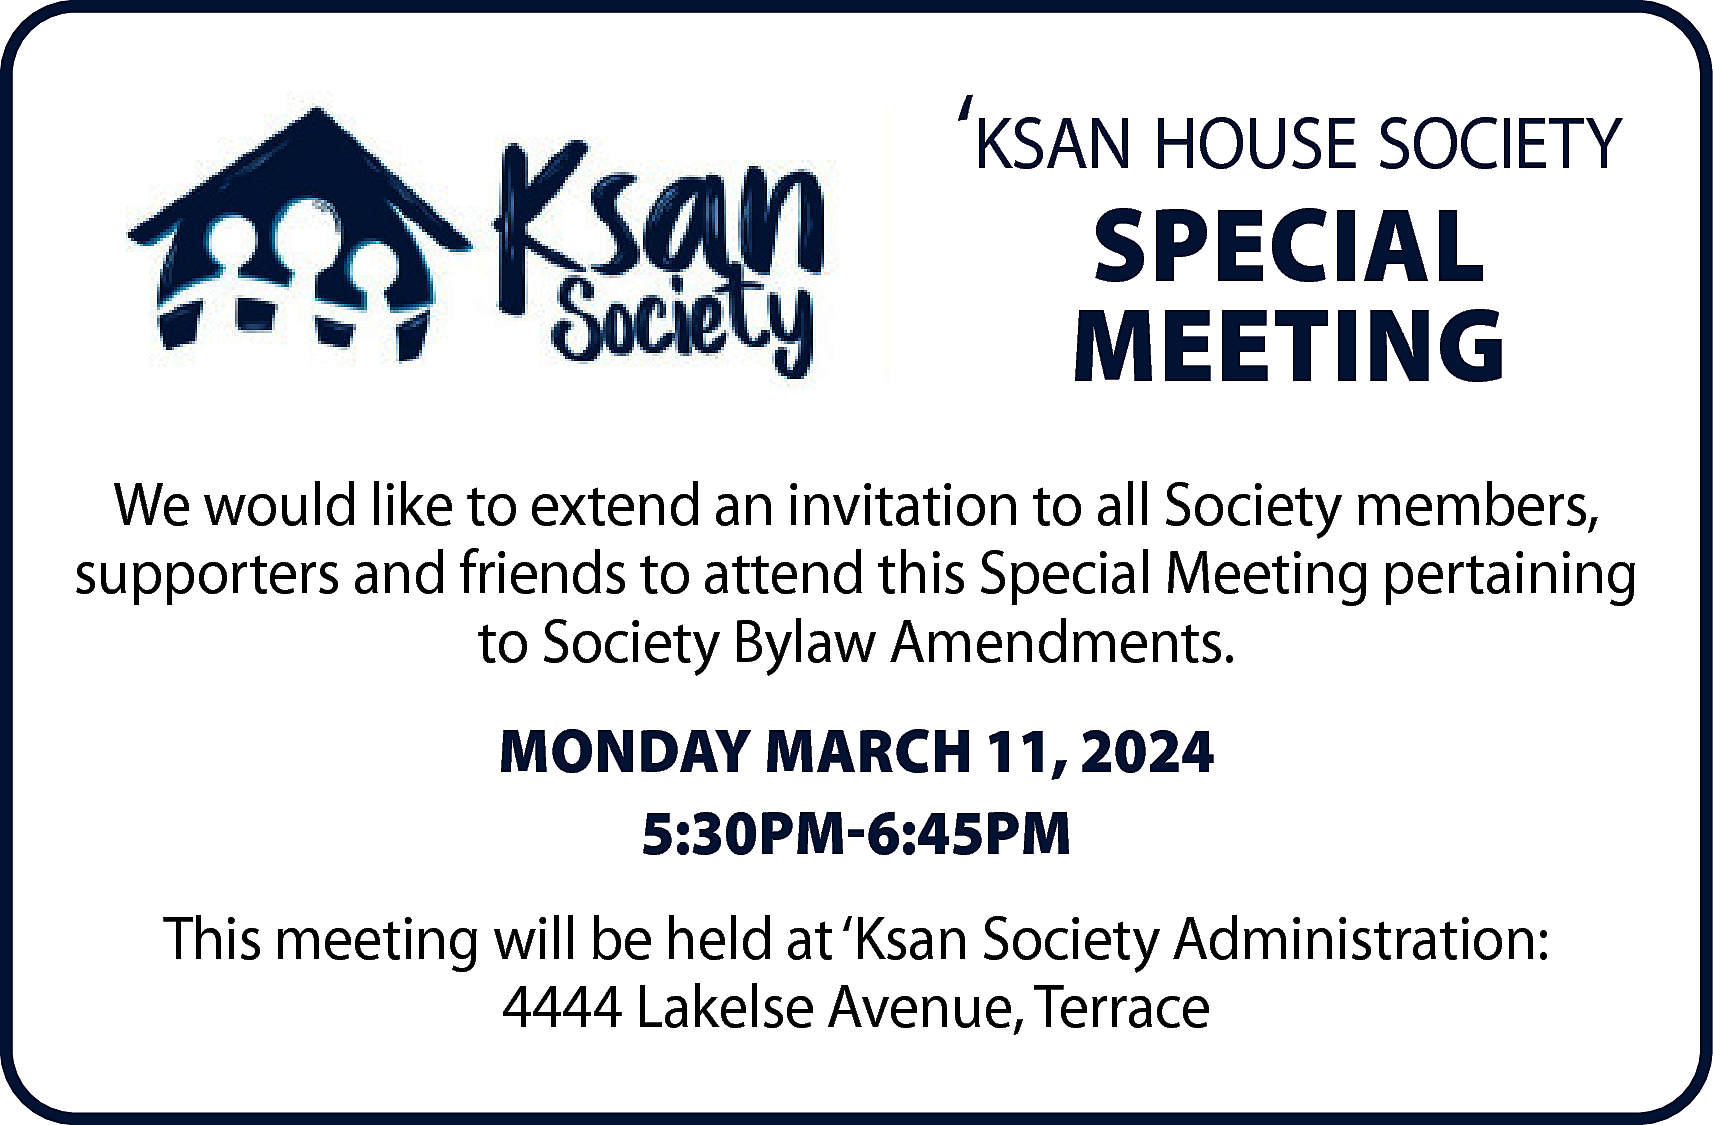 ‘ksan house society <br>SPECIAL <br>MEETING  ‘ksan house society  SPECIAL  MEETING  We would like to extend an invitation to all Society members,  supporters and friends to attend this Special Meeting pertaining  to Society Bylaw Amendments.  MONDAY MARCH 11, 2024  5:30PM-6:45PM  This meeting will be held at ‘Ksan Society Administration:  4444 Lakelse Avenue, Terrace    